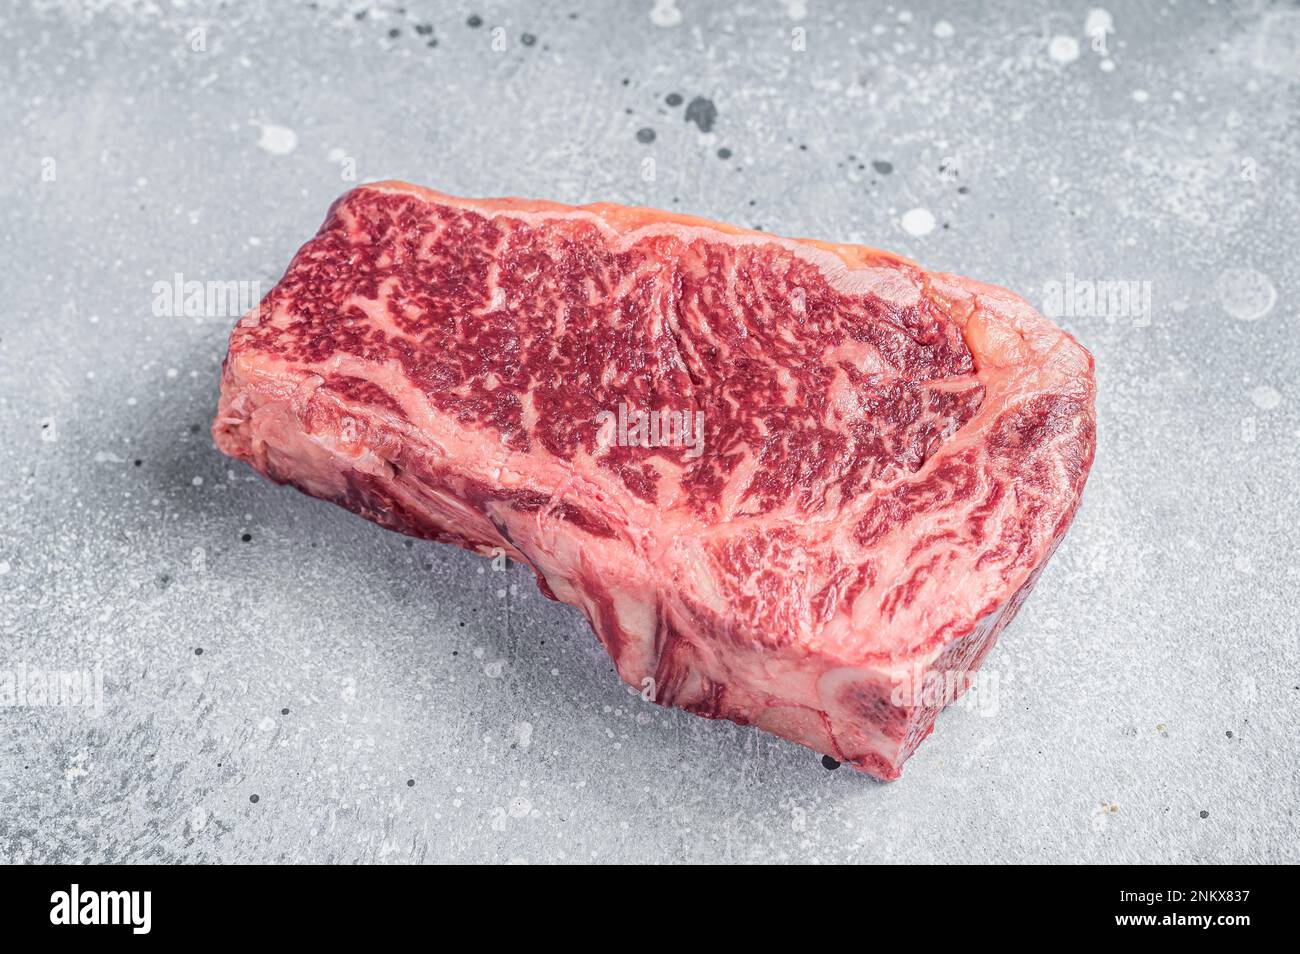 Raw Wagyu striploin or New york steak on a butcher table. Gray background. Top view. Stock Photo